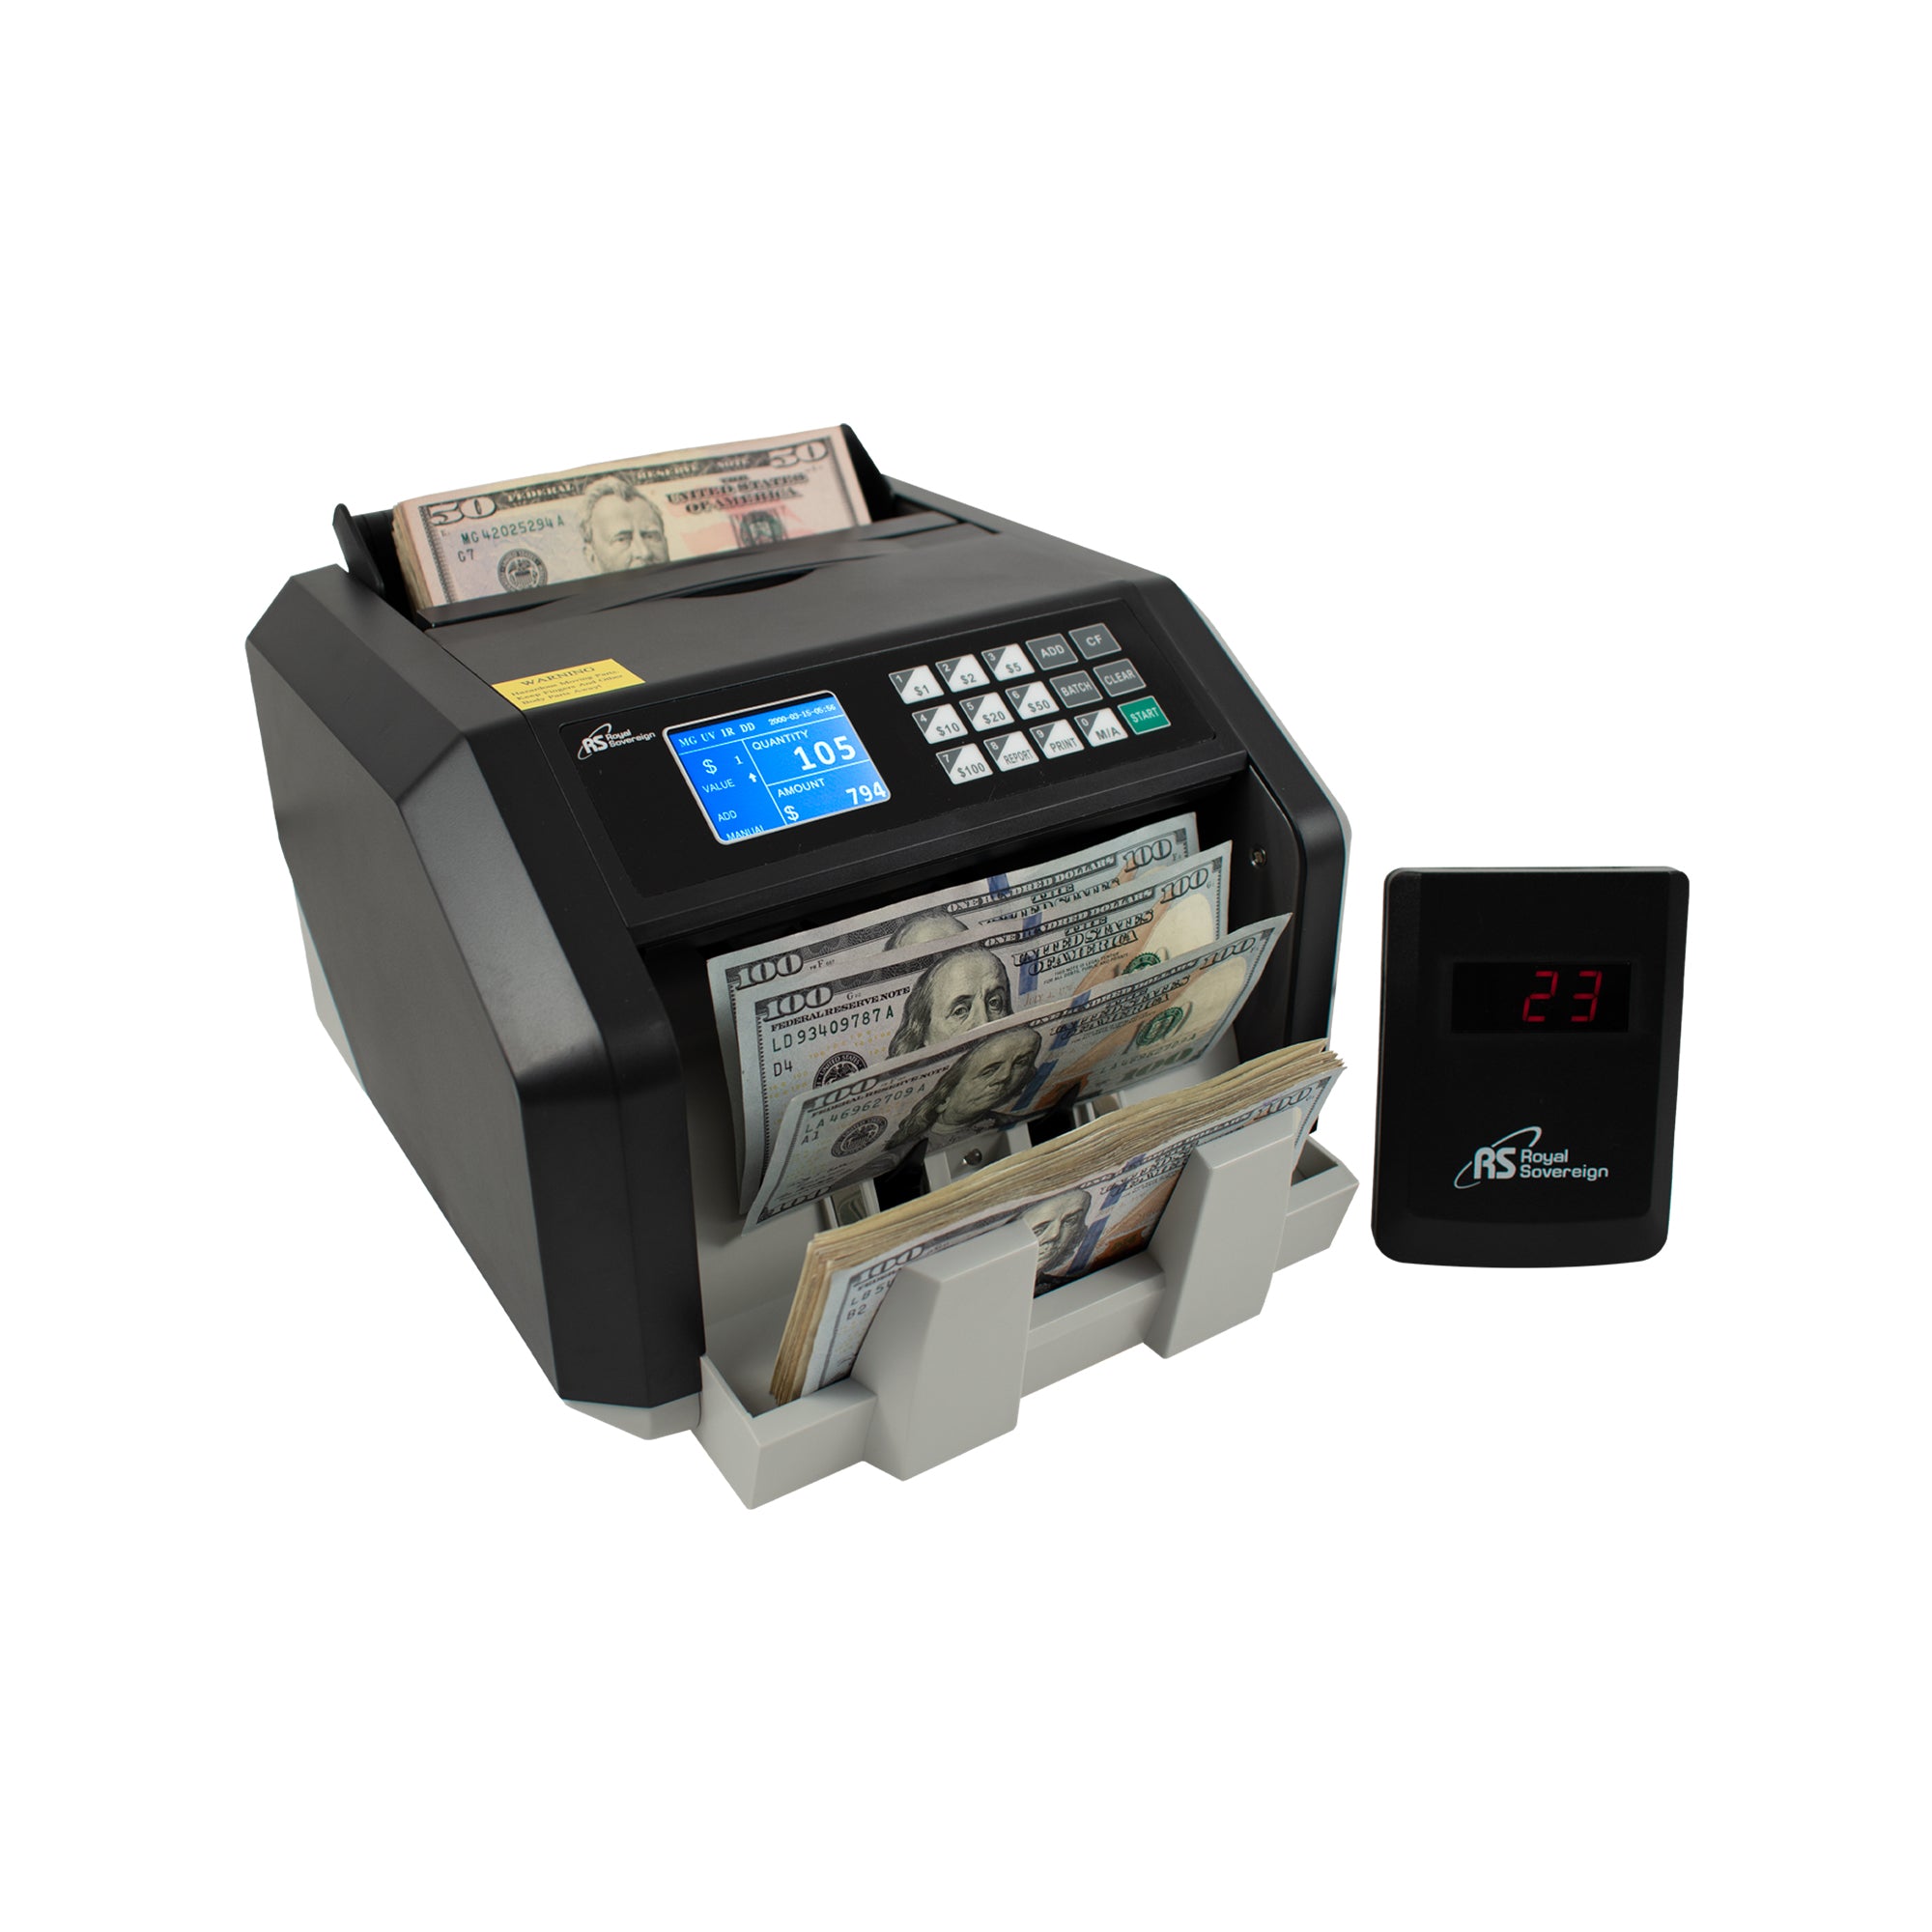 RBC-ES250, Bill Counter with Value Detection, Counterfeit Identification